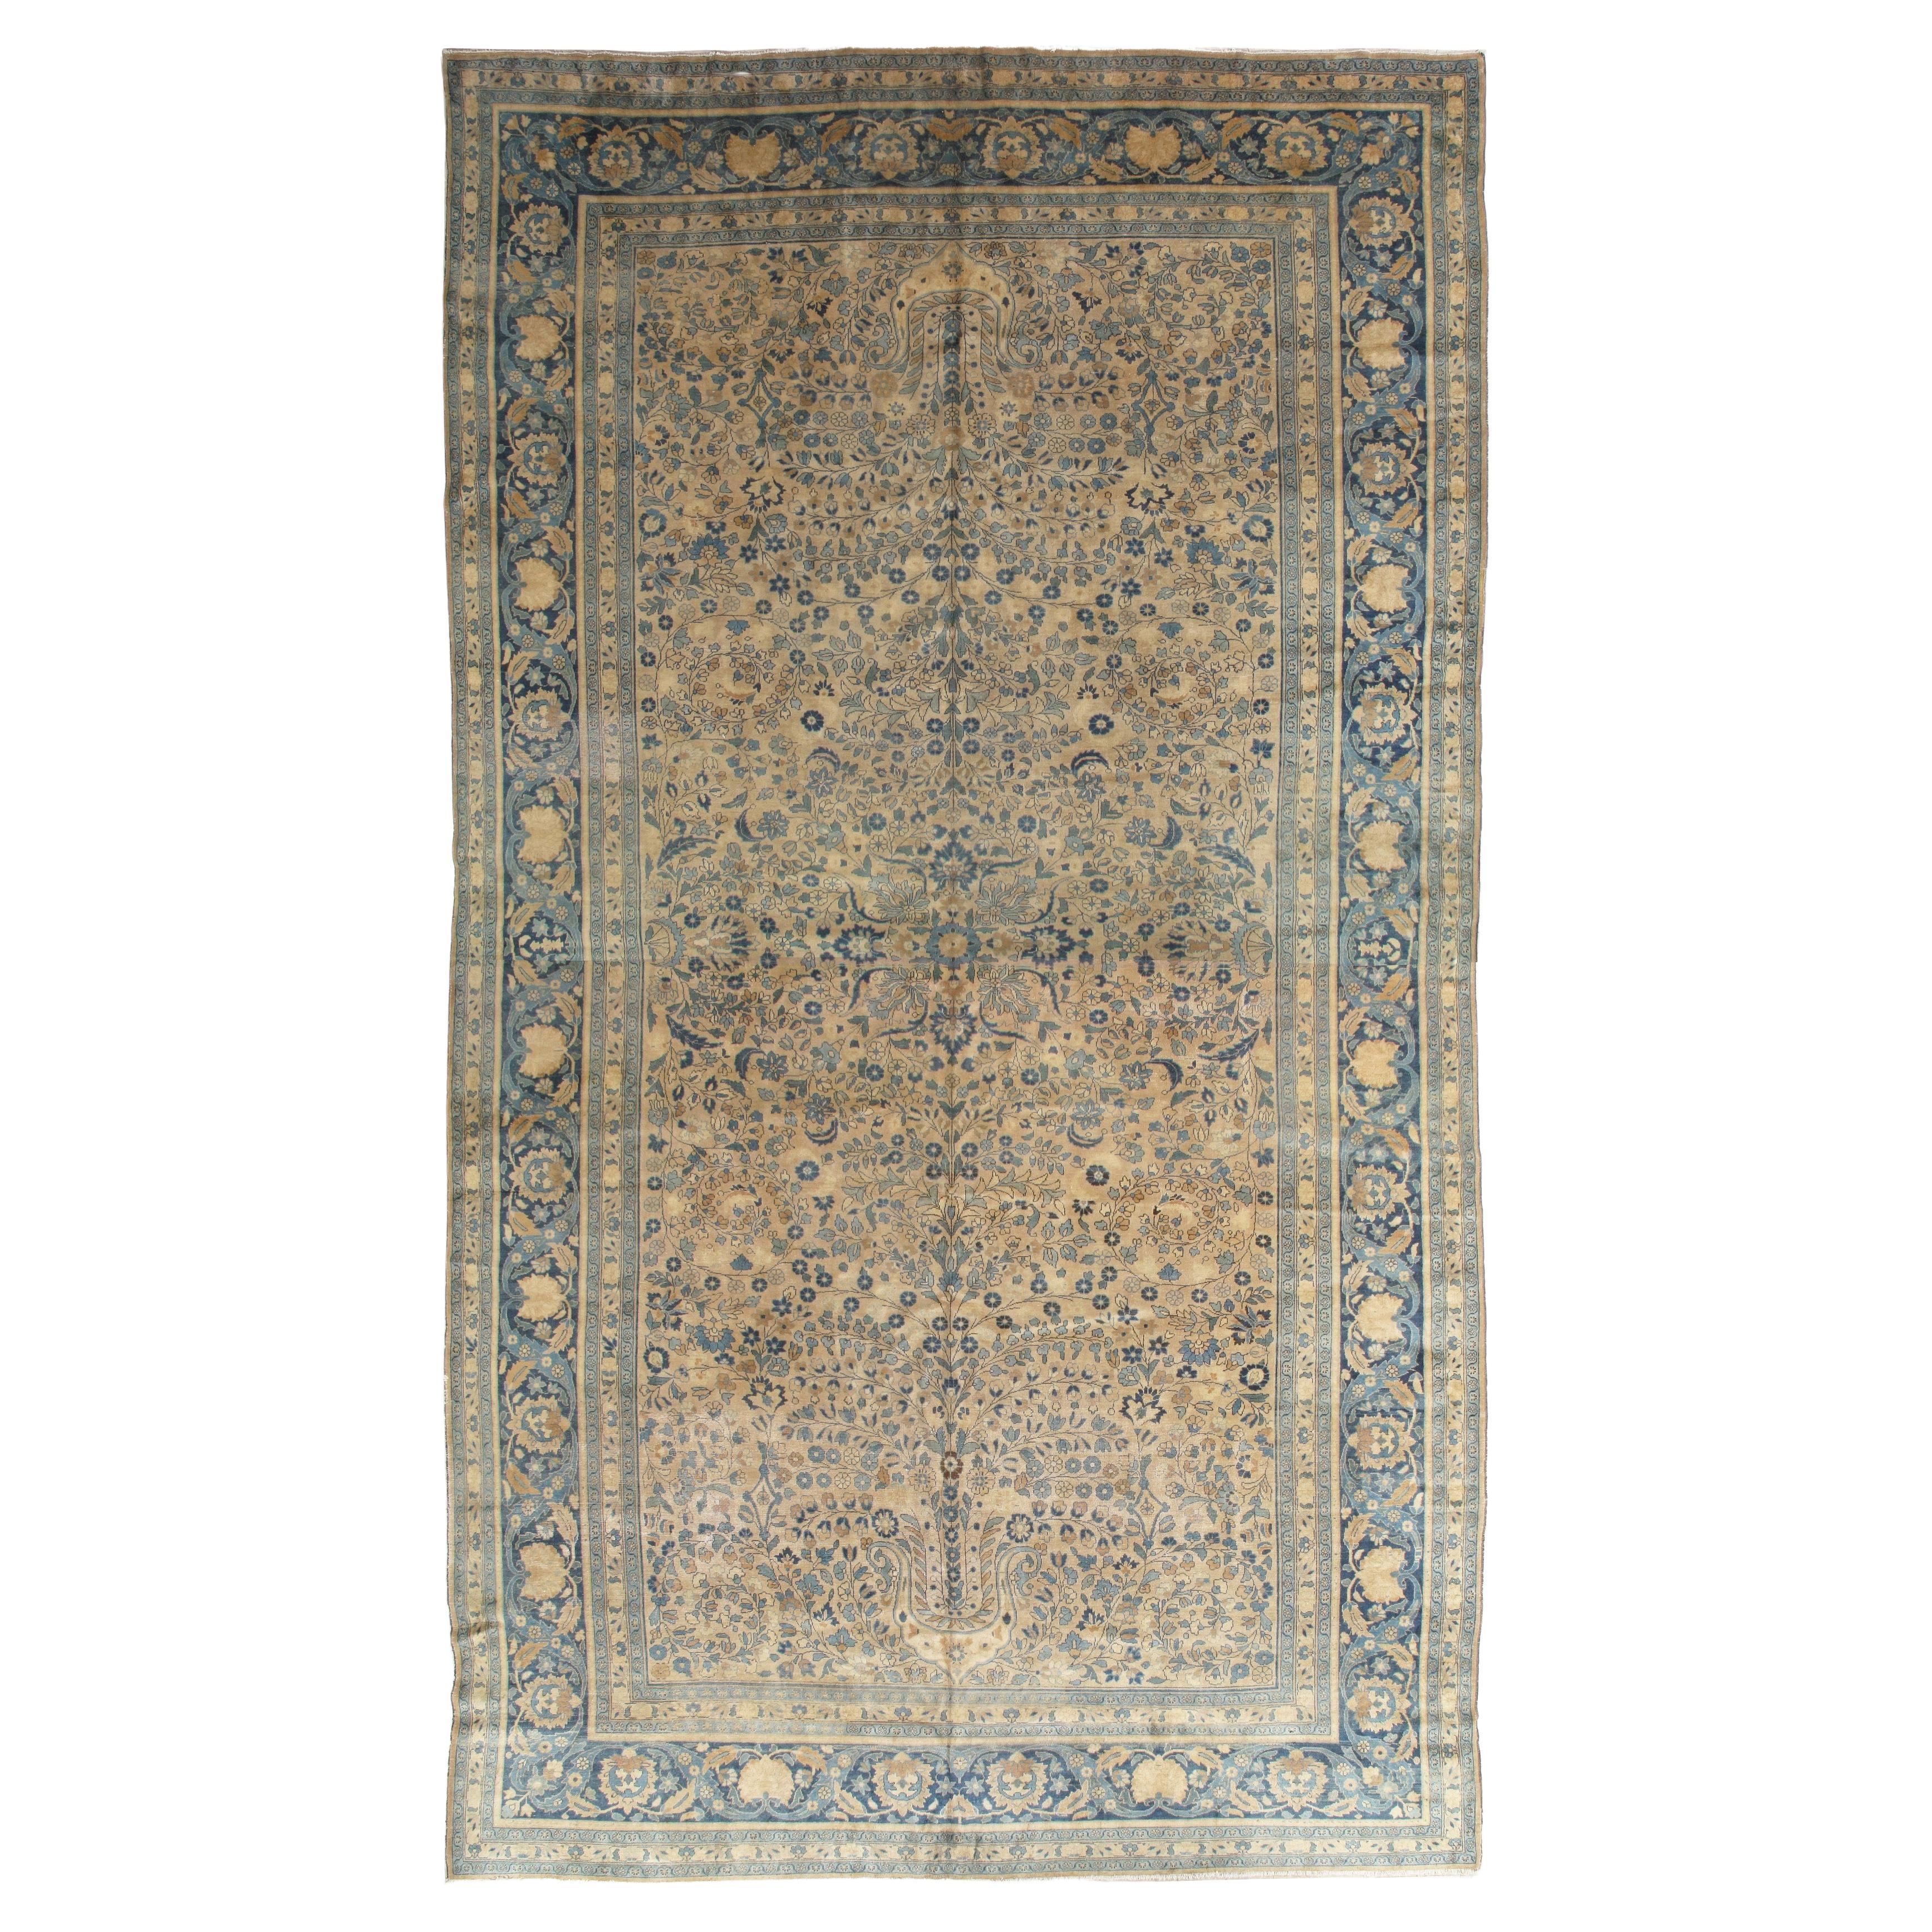 Antique Mashad Persian Carpet, Fine weave, Softs Blues, Beige, Soft Taupe